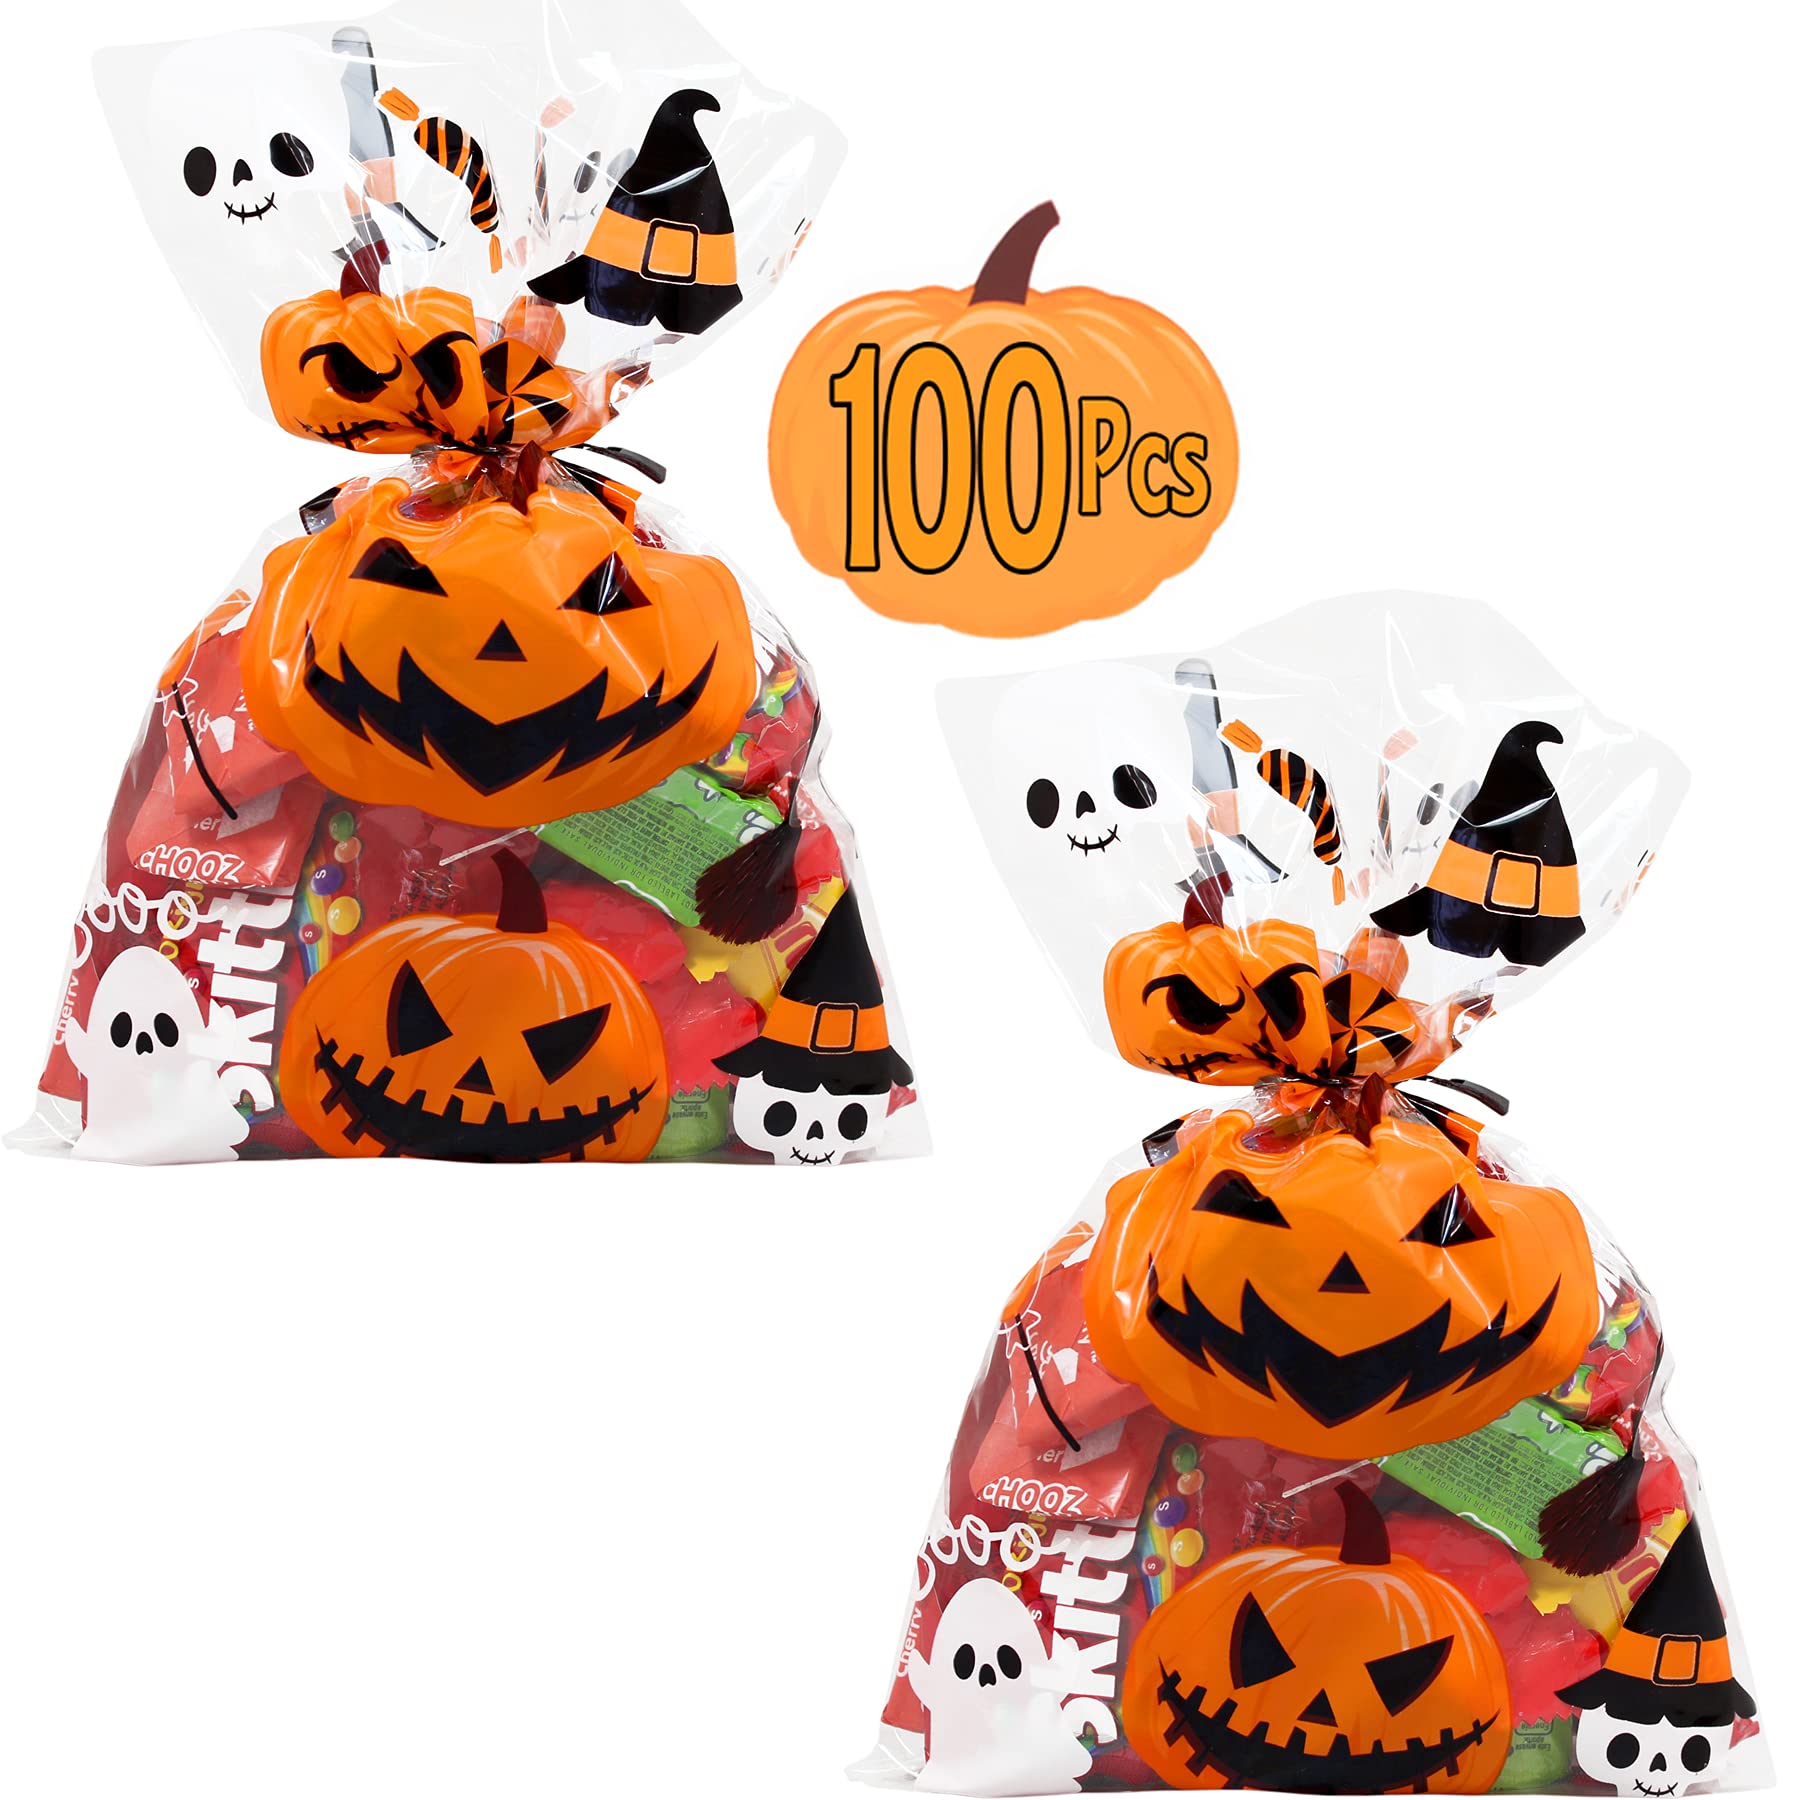 AnapoliZ Halloween Treat Bags | 100 pcs (6” x 9” Inch) |2.5 Mil Crystal Clear Cellophane Bags with Fun Scary Designs | Pumpkins, Witches Cello Bags | Halloween Party Decorations, Spooky Treat Bags